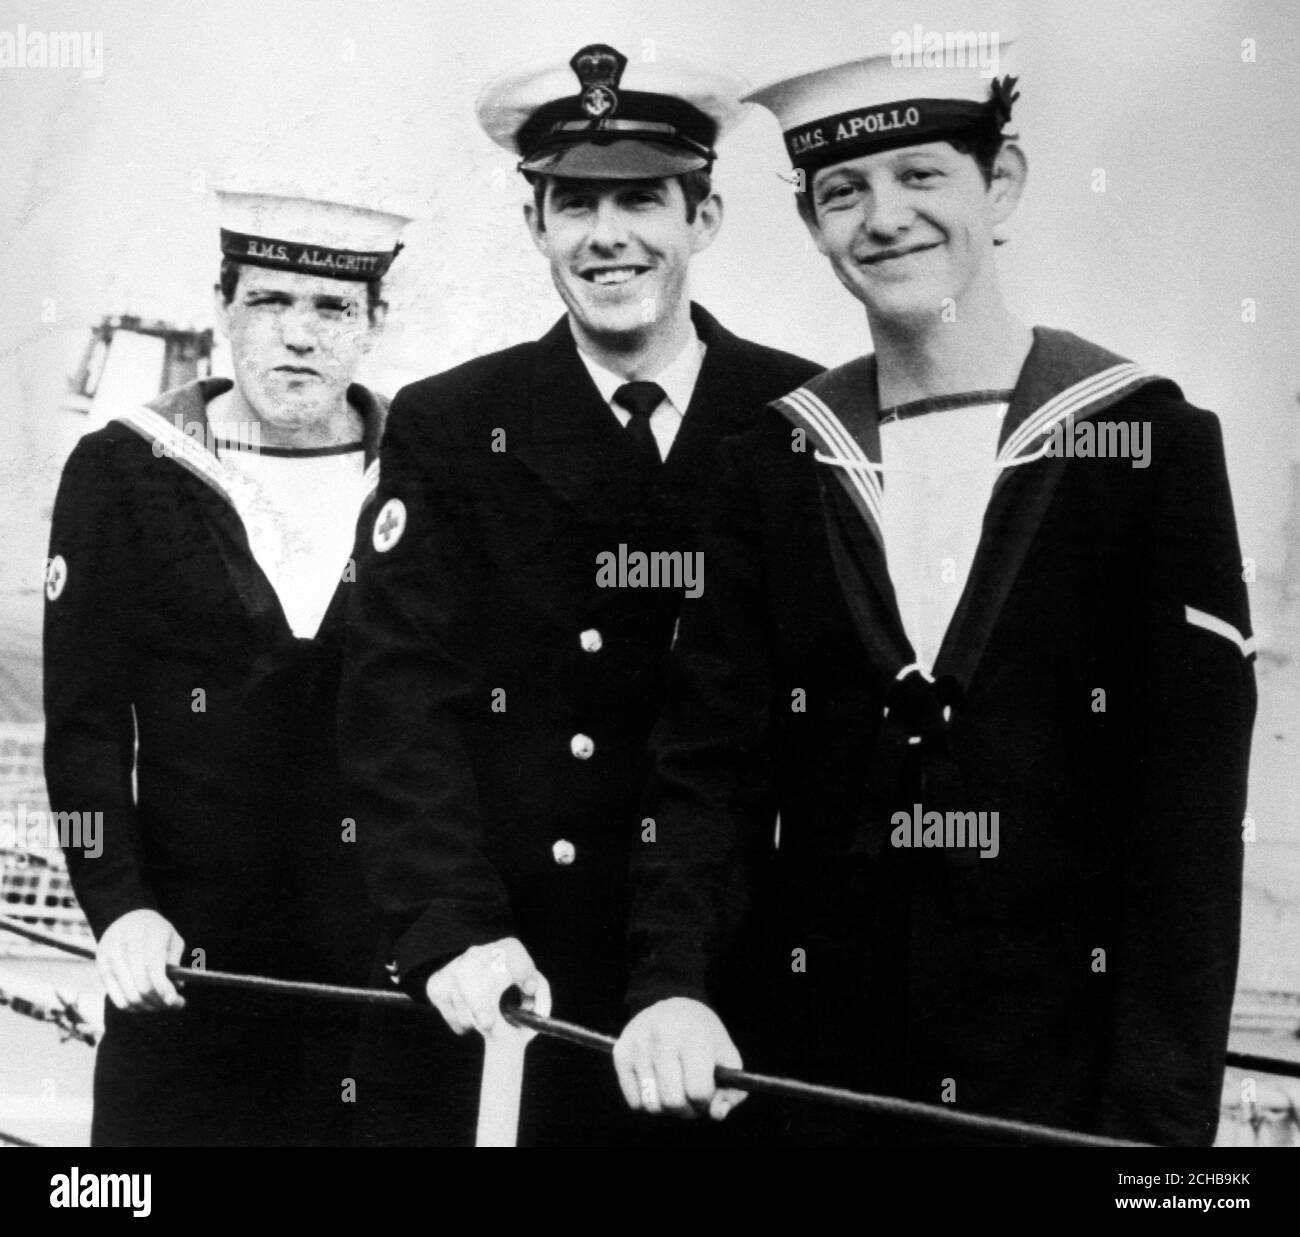 The three Coulton brothers who went to war in the Falklands in different ships met today for the first time since the conflict started. Navy cook Sean (r), 21, came home on HMS 'Apollo' to Devonport to meet his brothers Brendon (l), 23, from HMS 'Alacrity', and Petty Officer medical assistant Ian, 27, from the hospital ship 'Uganda'. Stock Photo